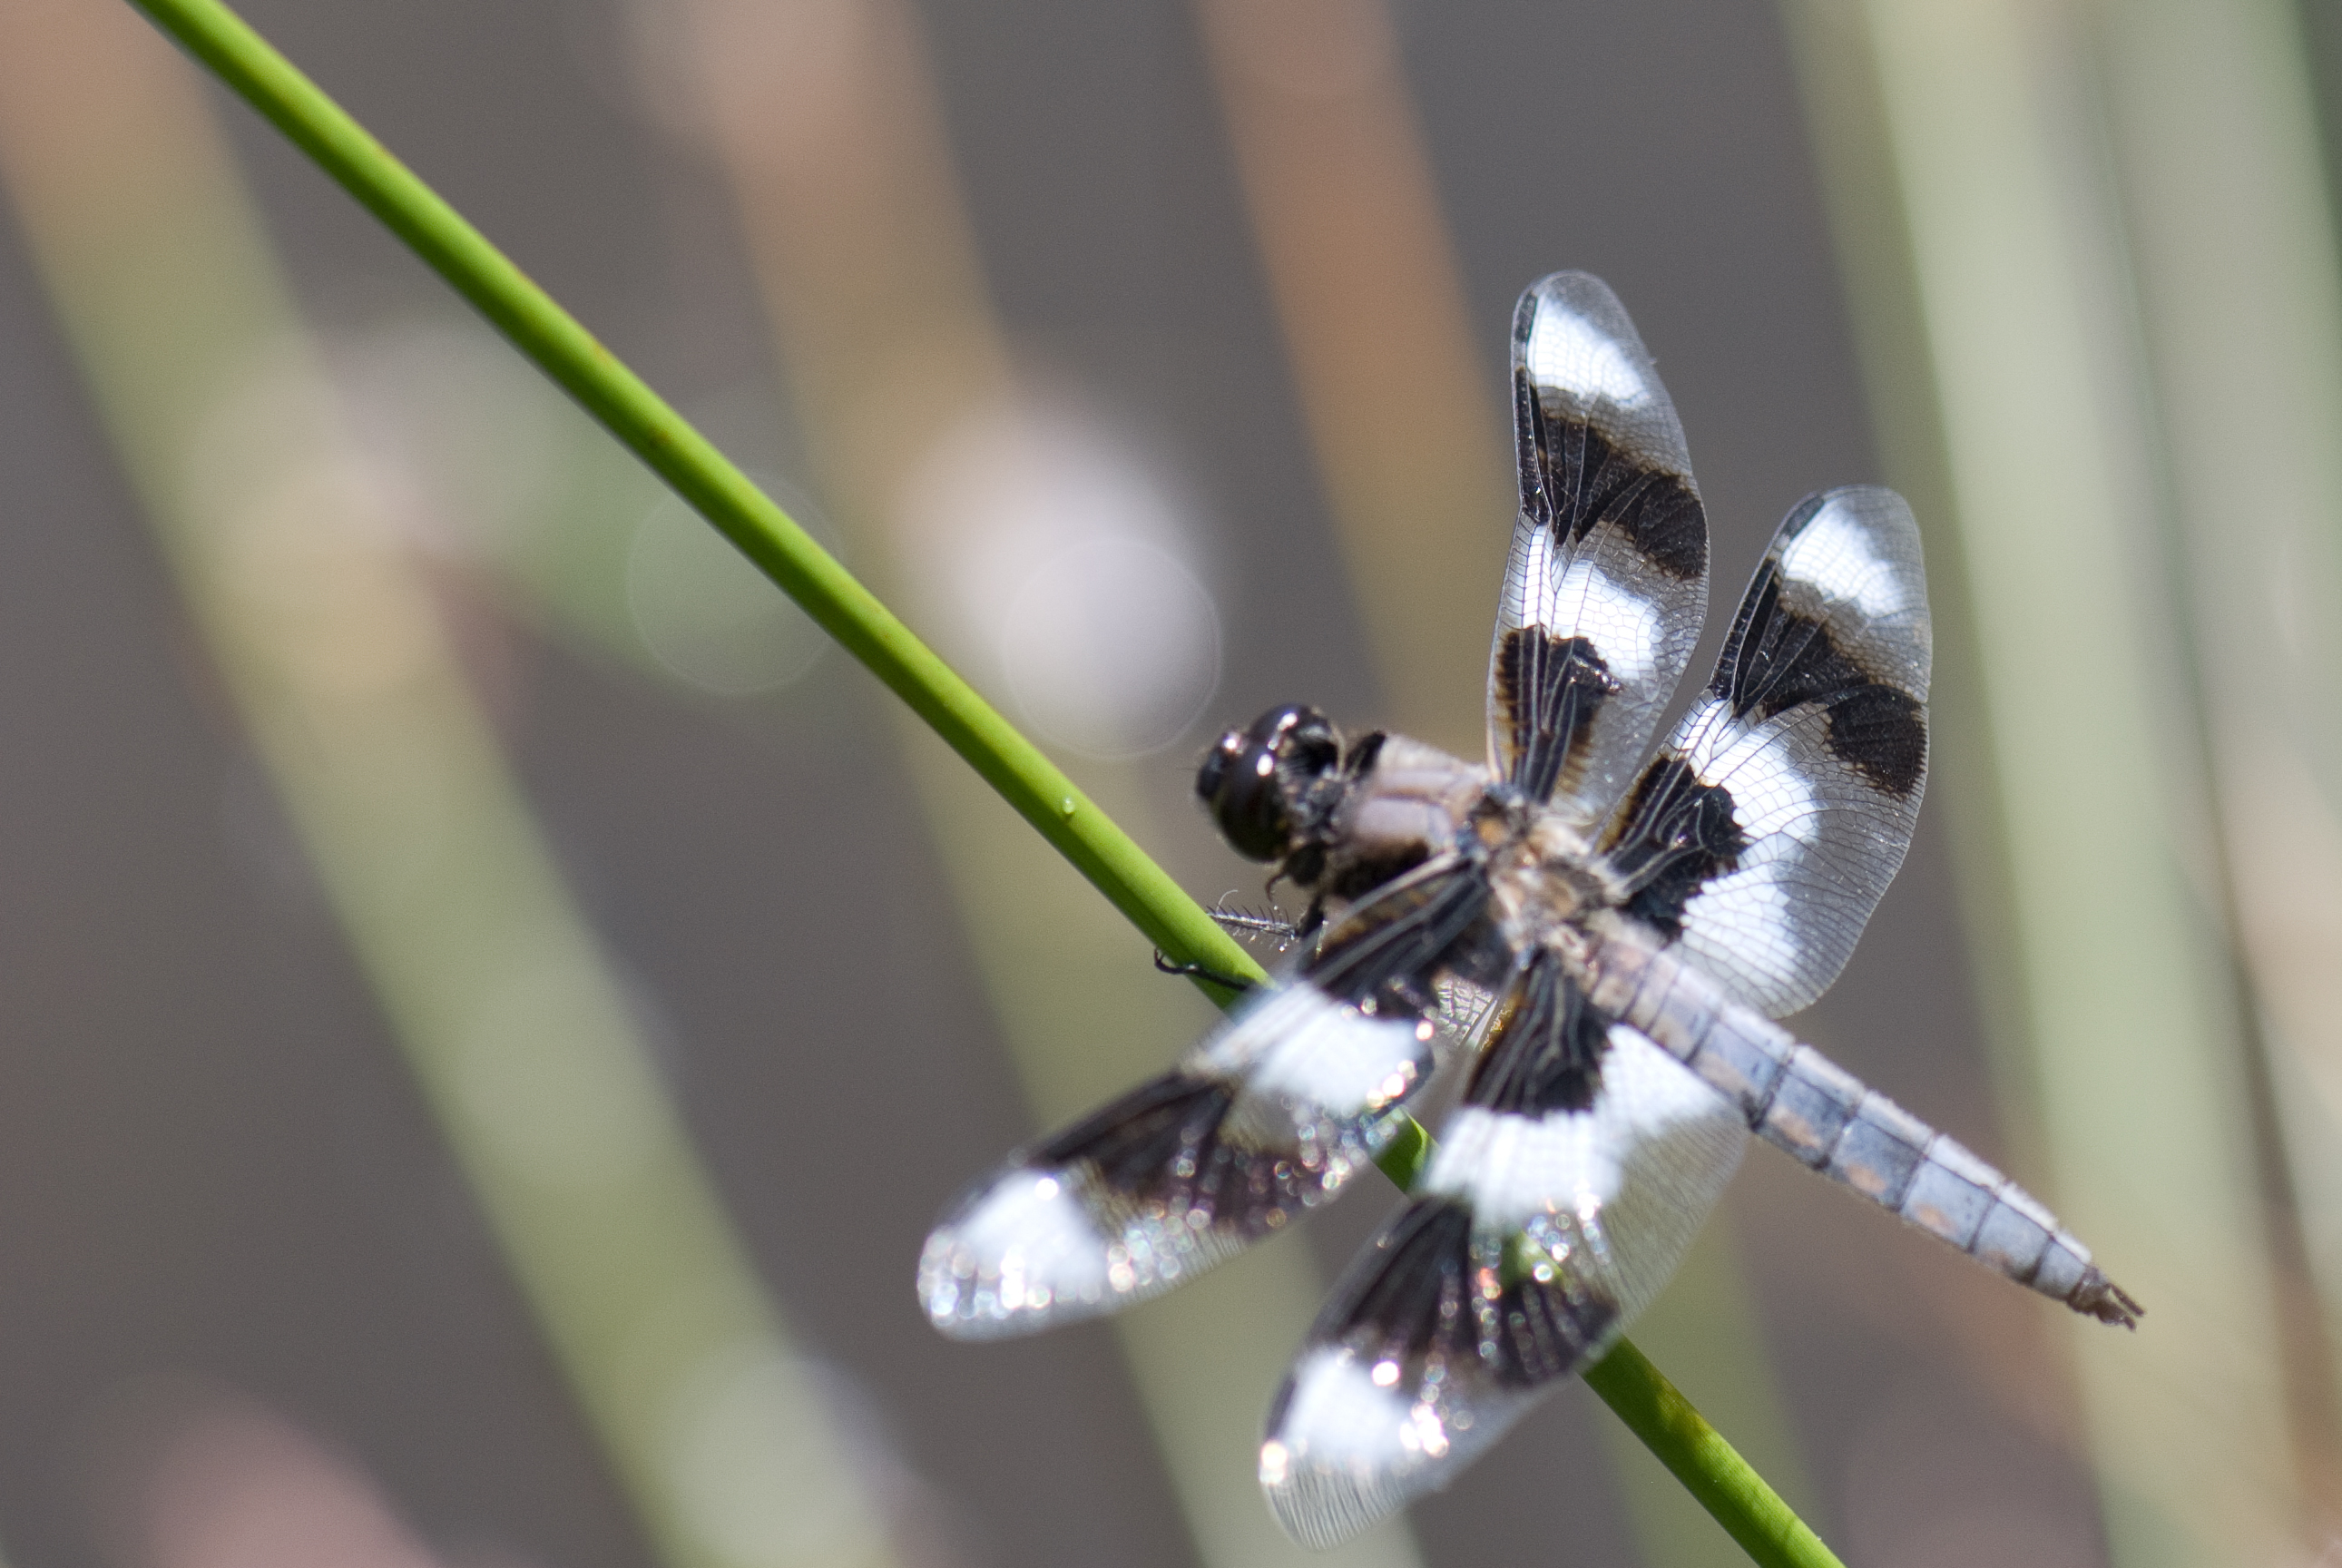 File:Black and white dragonfly (5648398791).jpg - Wikimedia Commons